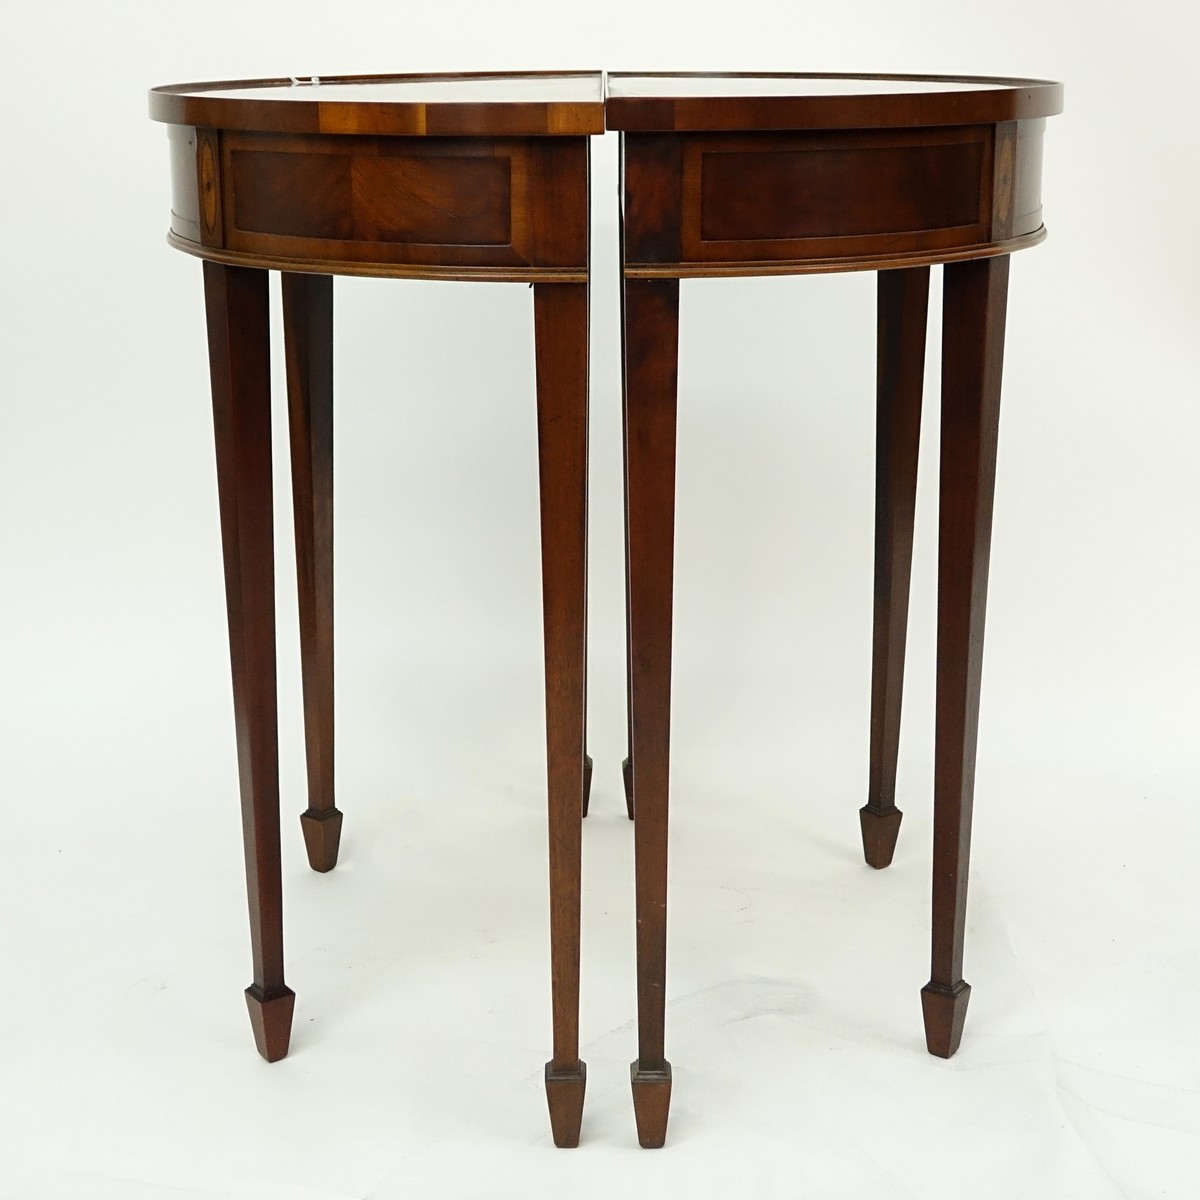 Pair of Sheraton Style Flame Mahogany, Marquetry Inlaid Demi Lune Tables. Light scuffs to top on both, one has wear to veneered top.